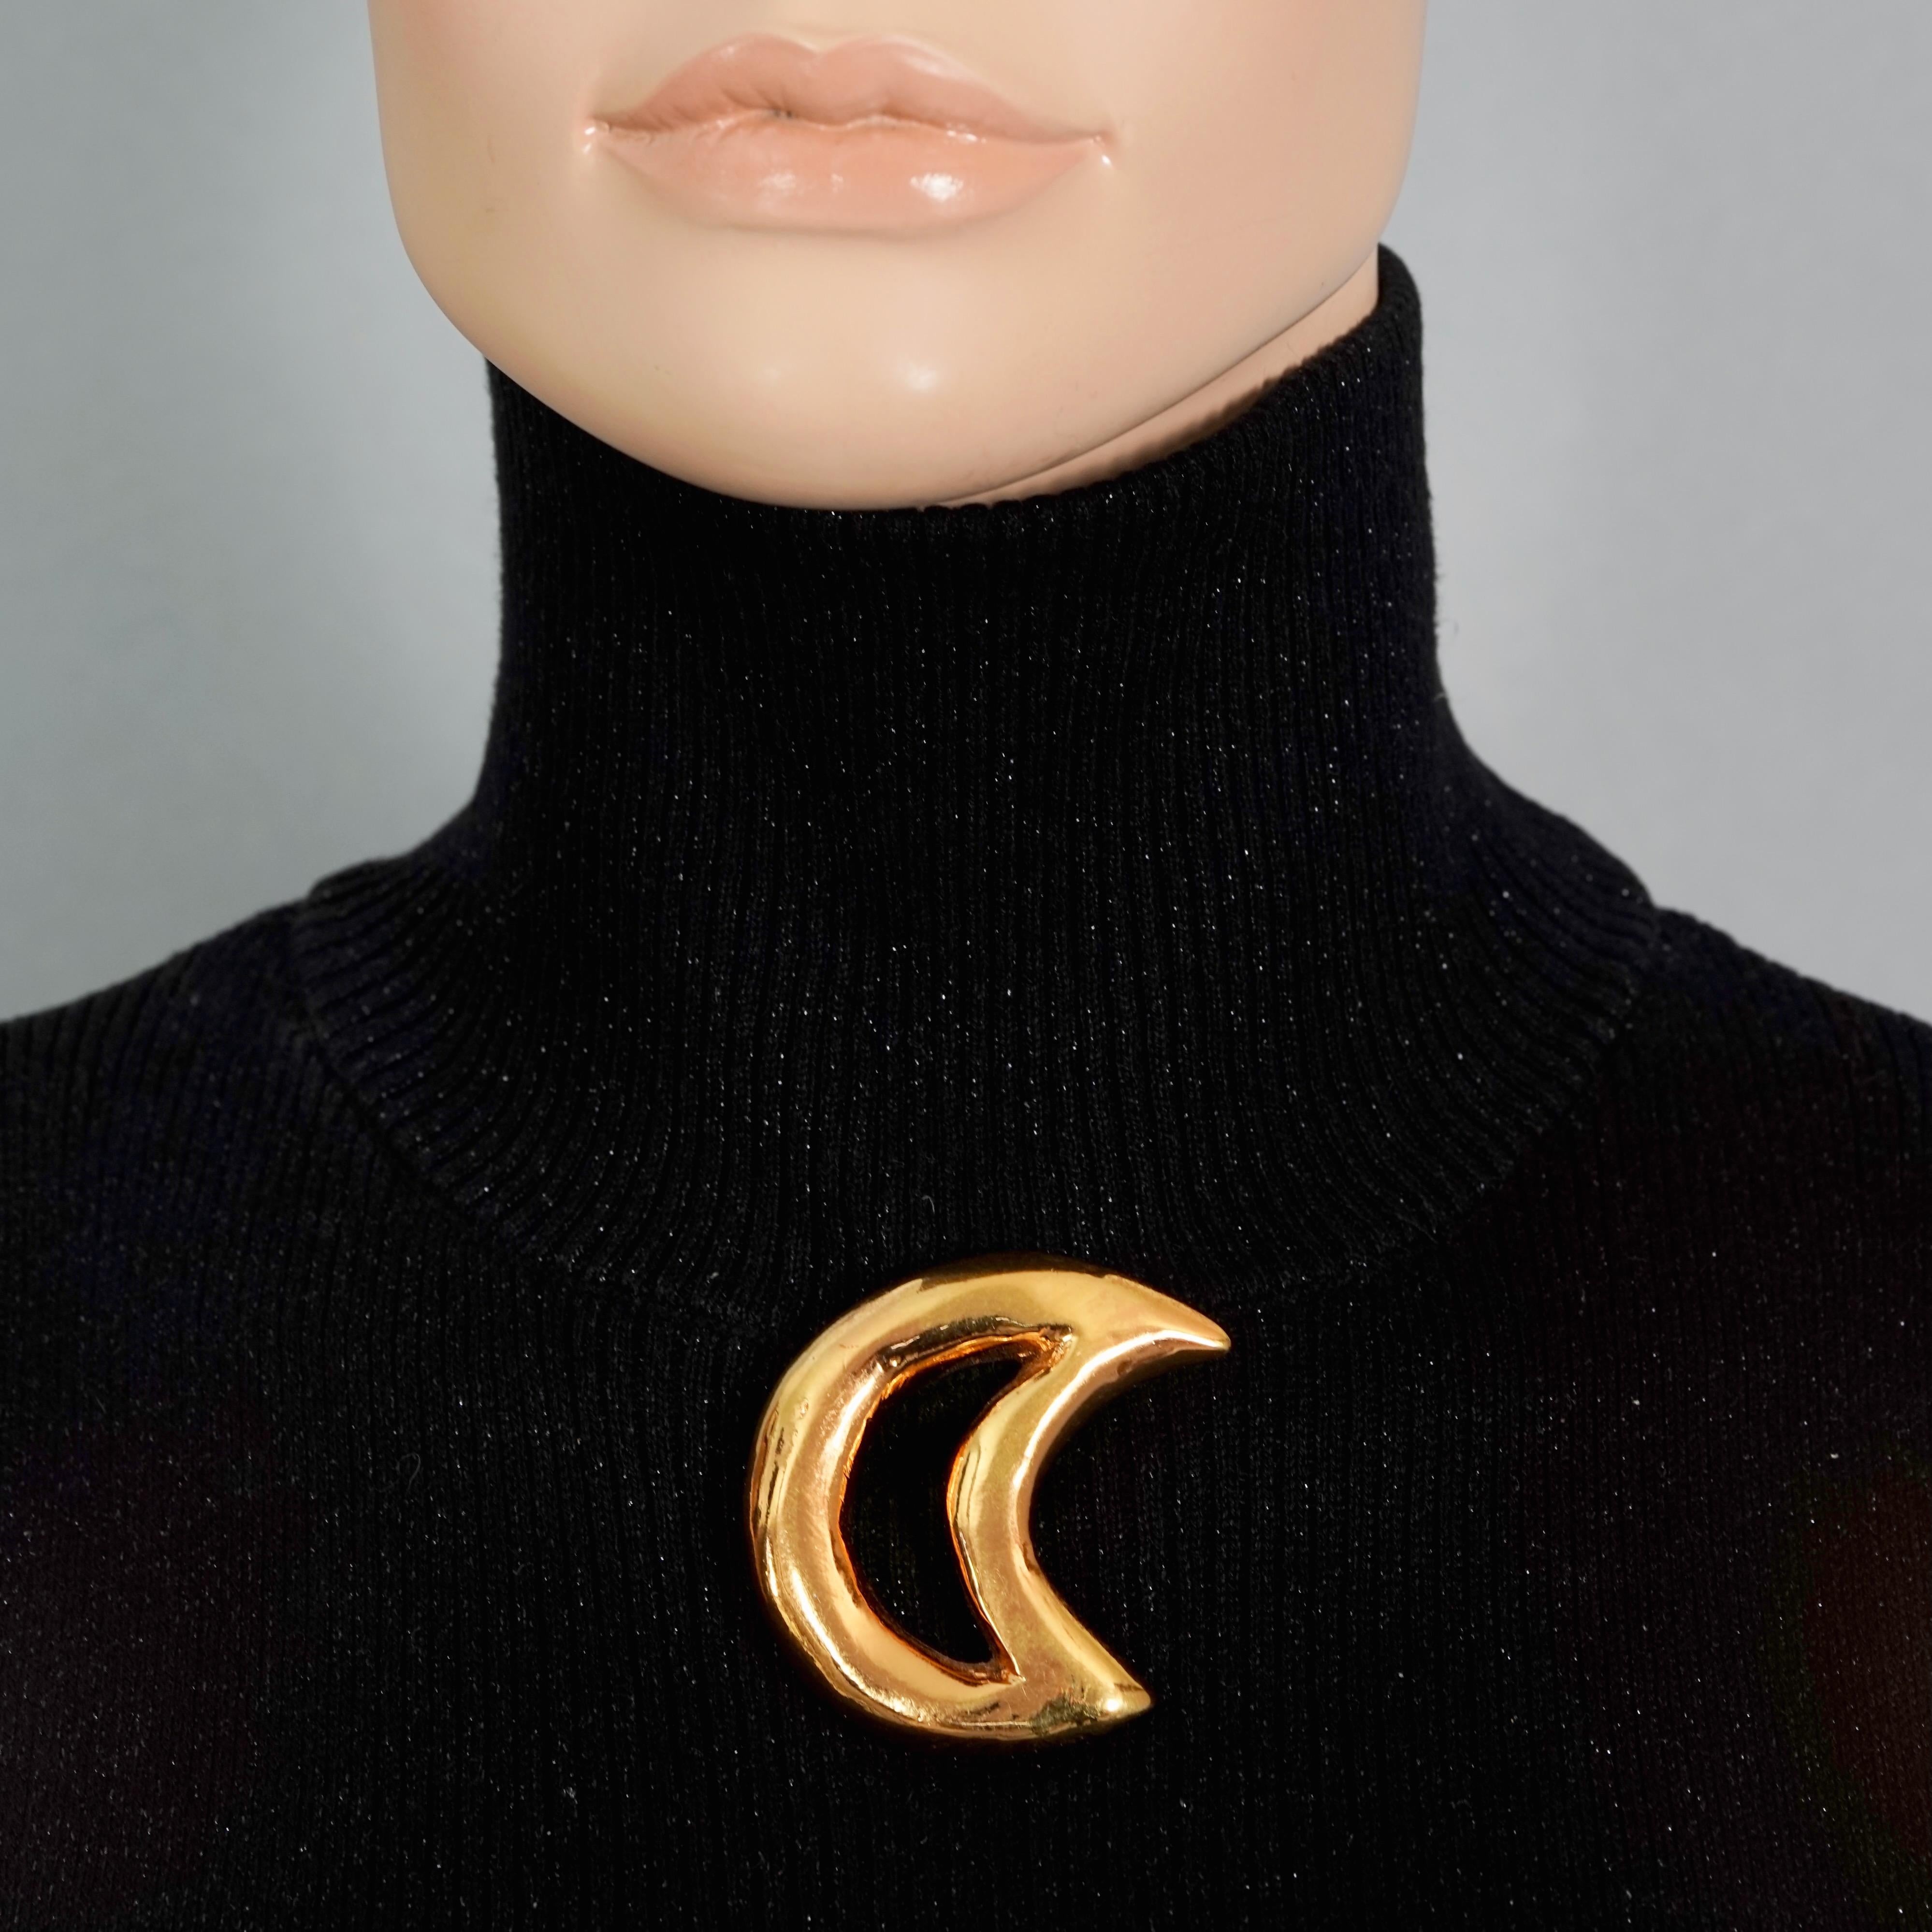 Vintage CHRISTIAN LACROIX Cutout Gold Moon Brooch

Measurements:
Height: 2.16 inches (5.5 cm)
Width: 2.16 inches (5.5 cm)

Features:
- 100% Authentic CHRISTIAN LACROIX.
- Cutout moon gilt resin brooch.
- Gold tone hardware.
- Signed Christian